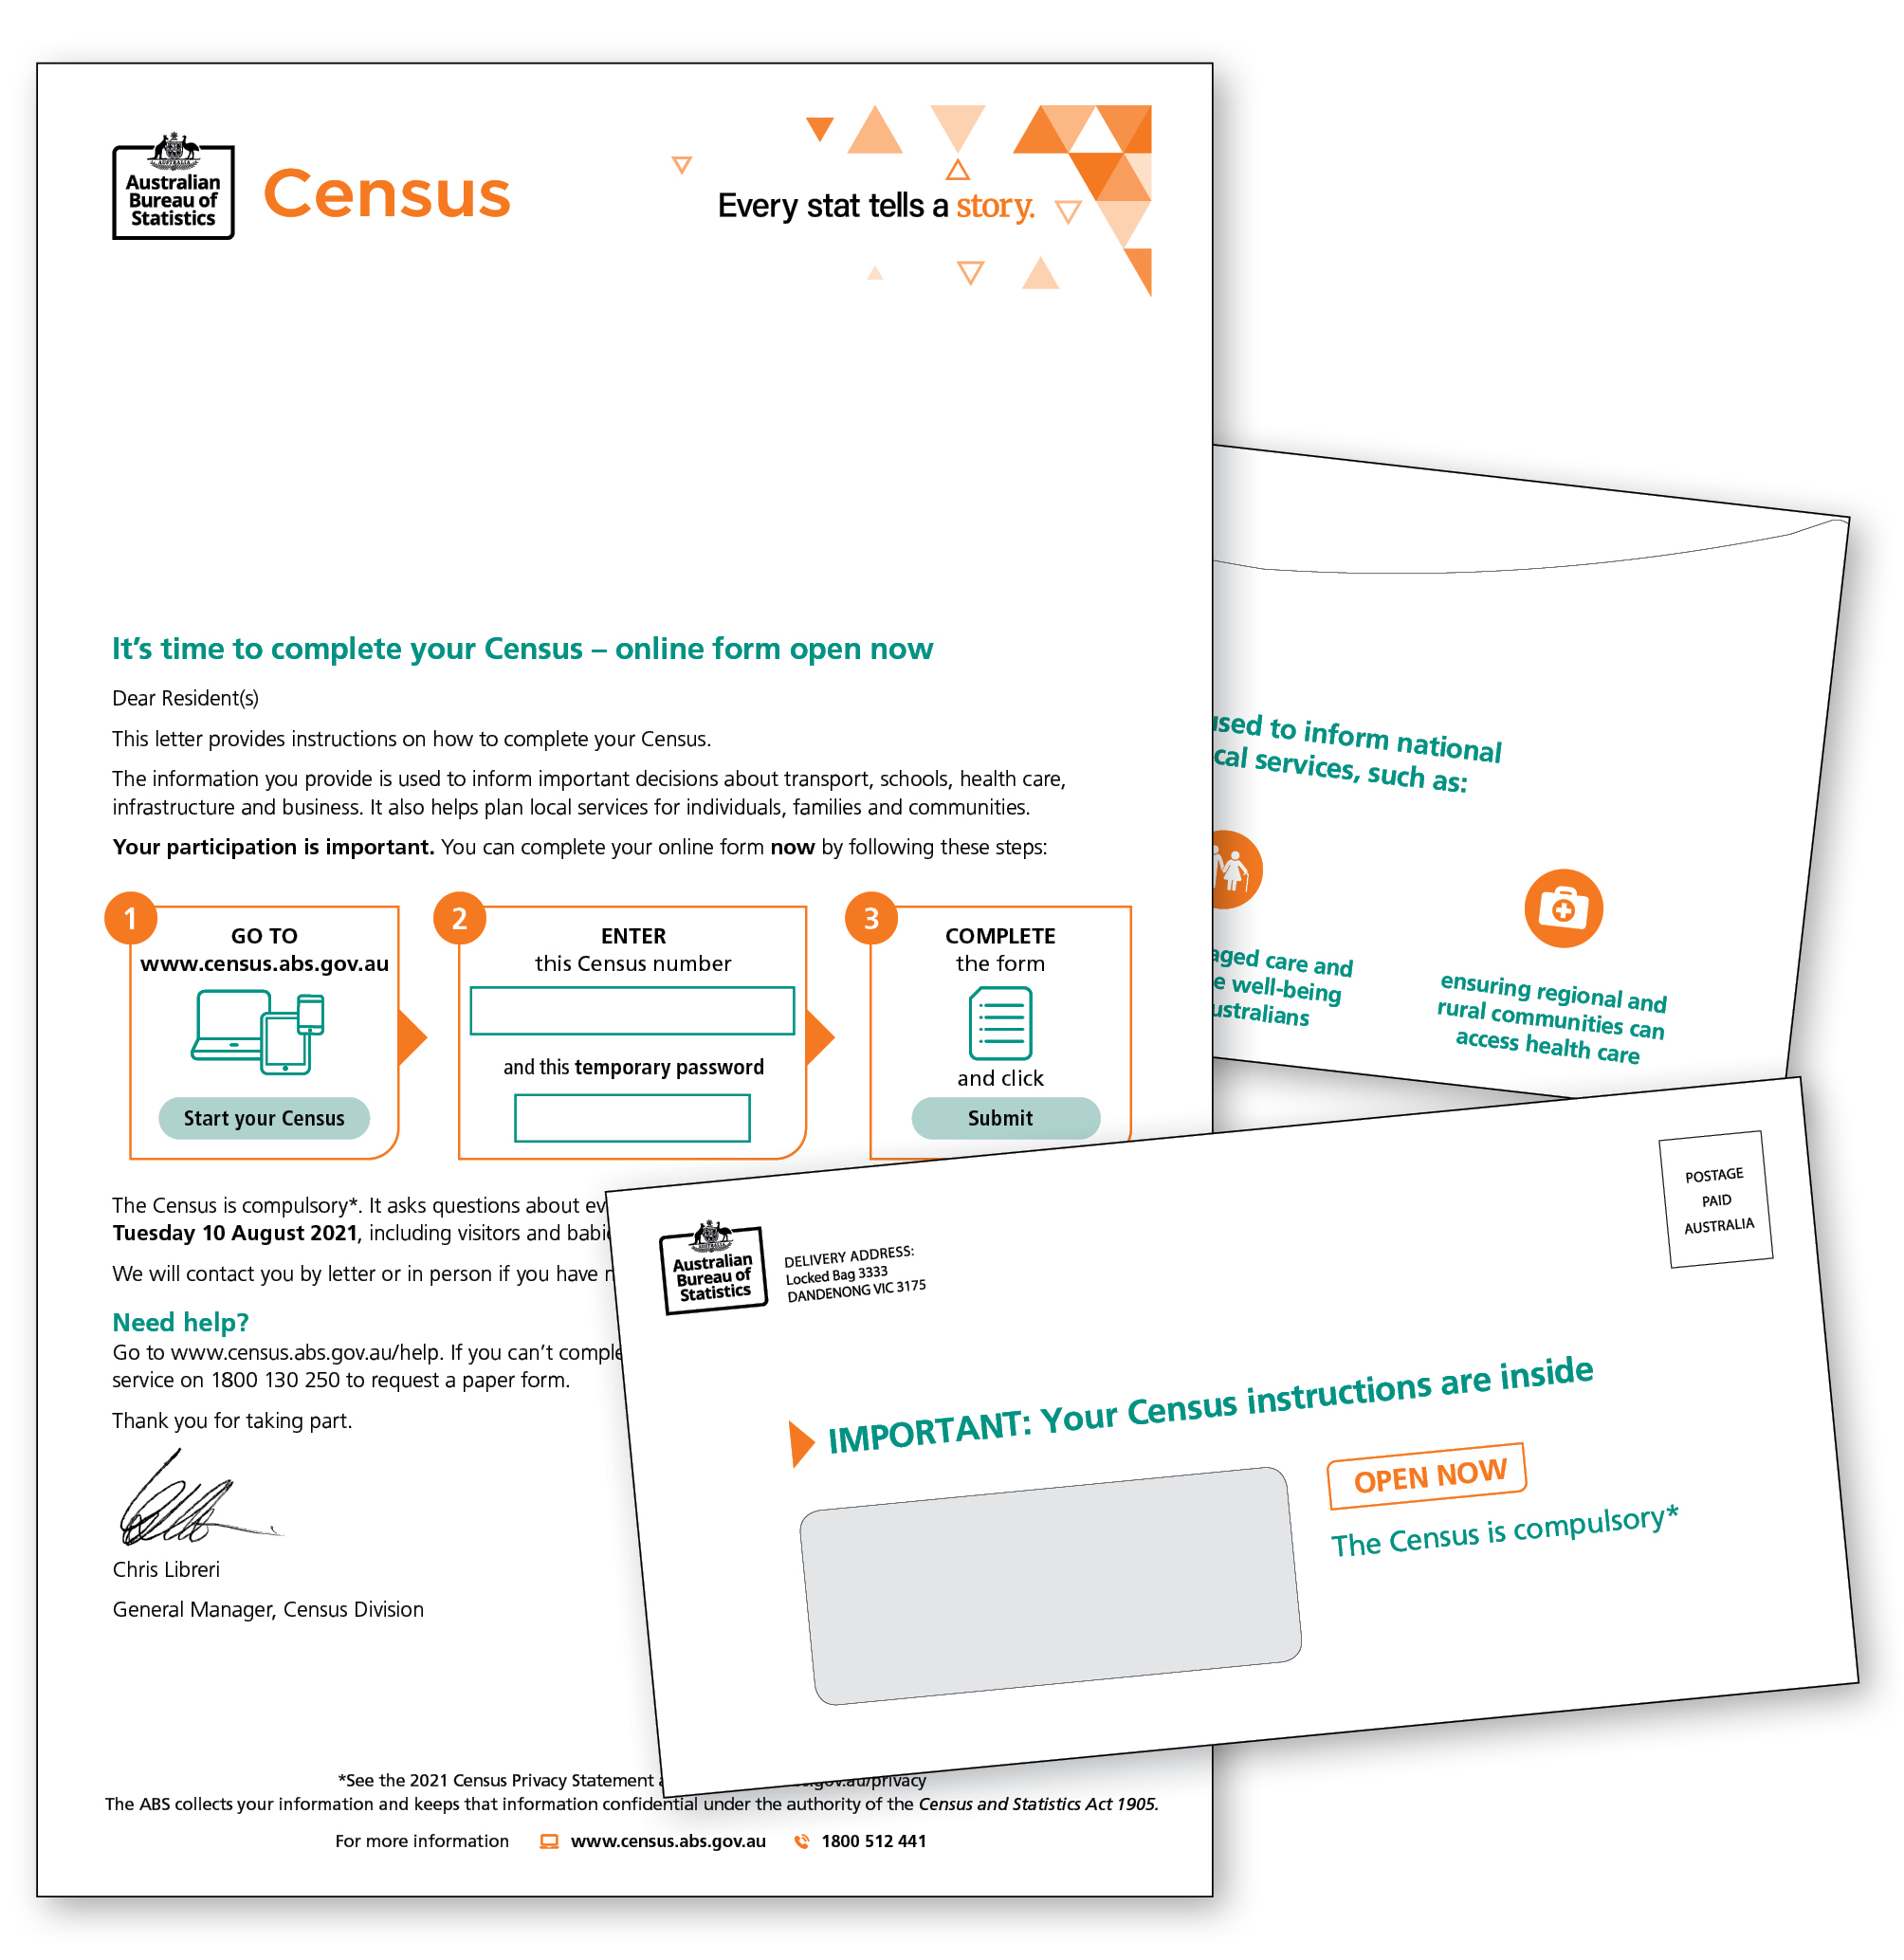 Image of the Census Instruction Letter and the front and back views of the envelope